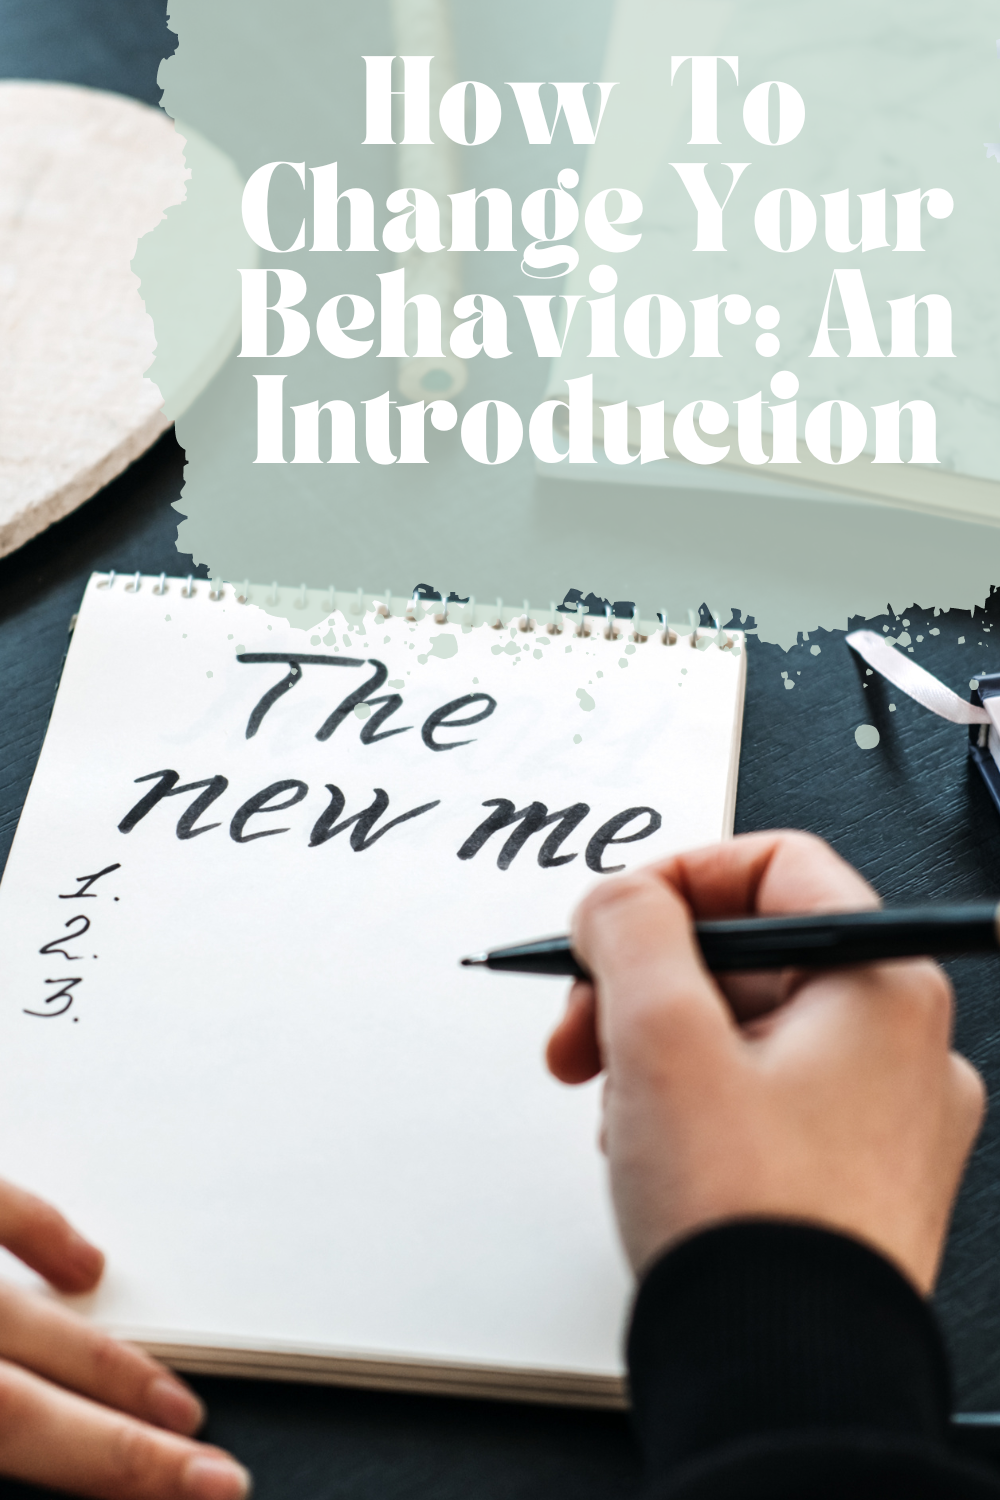 How to Change your Behavior: An Introduction